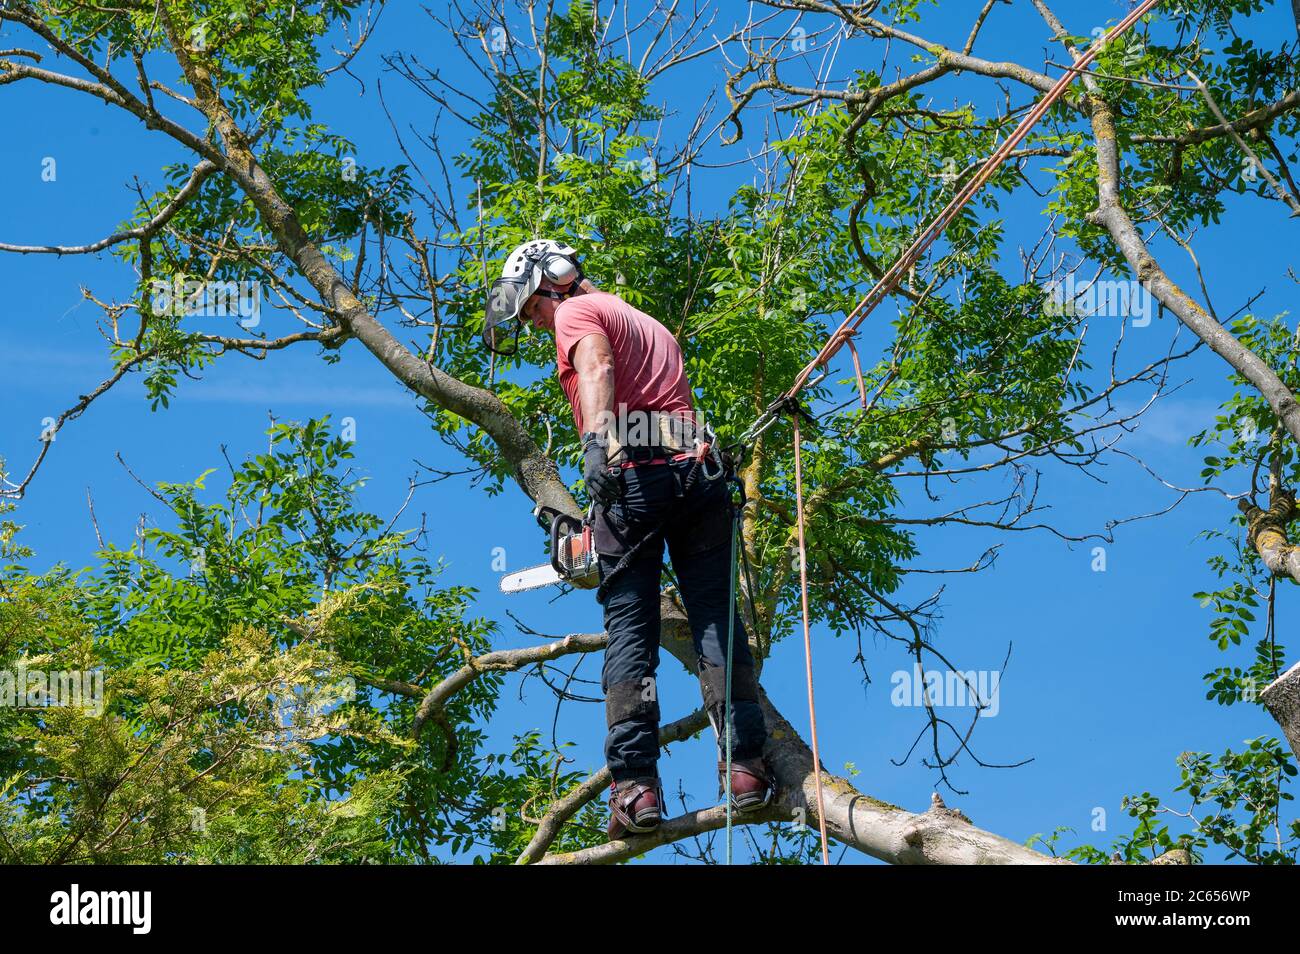 A Tree Surgeon or Arborist using safety ropes ready to work up a tree. Stock Photo